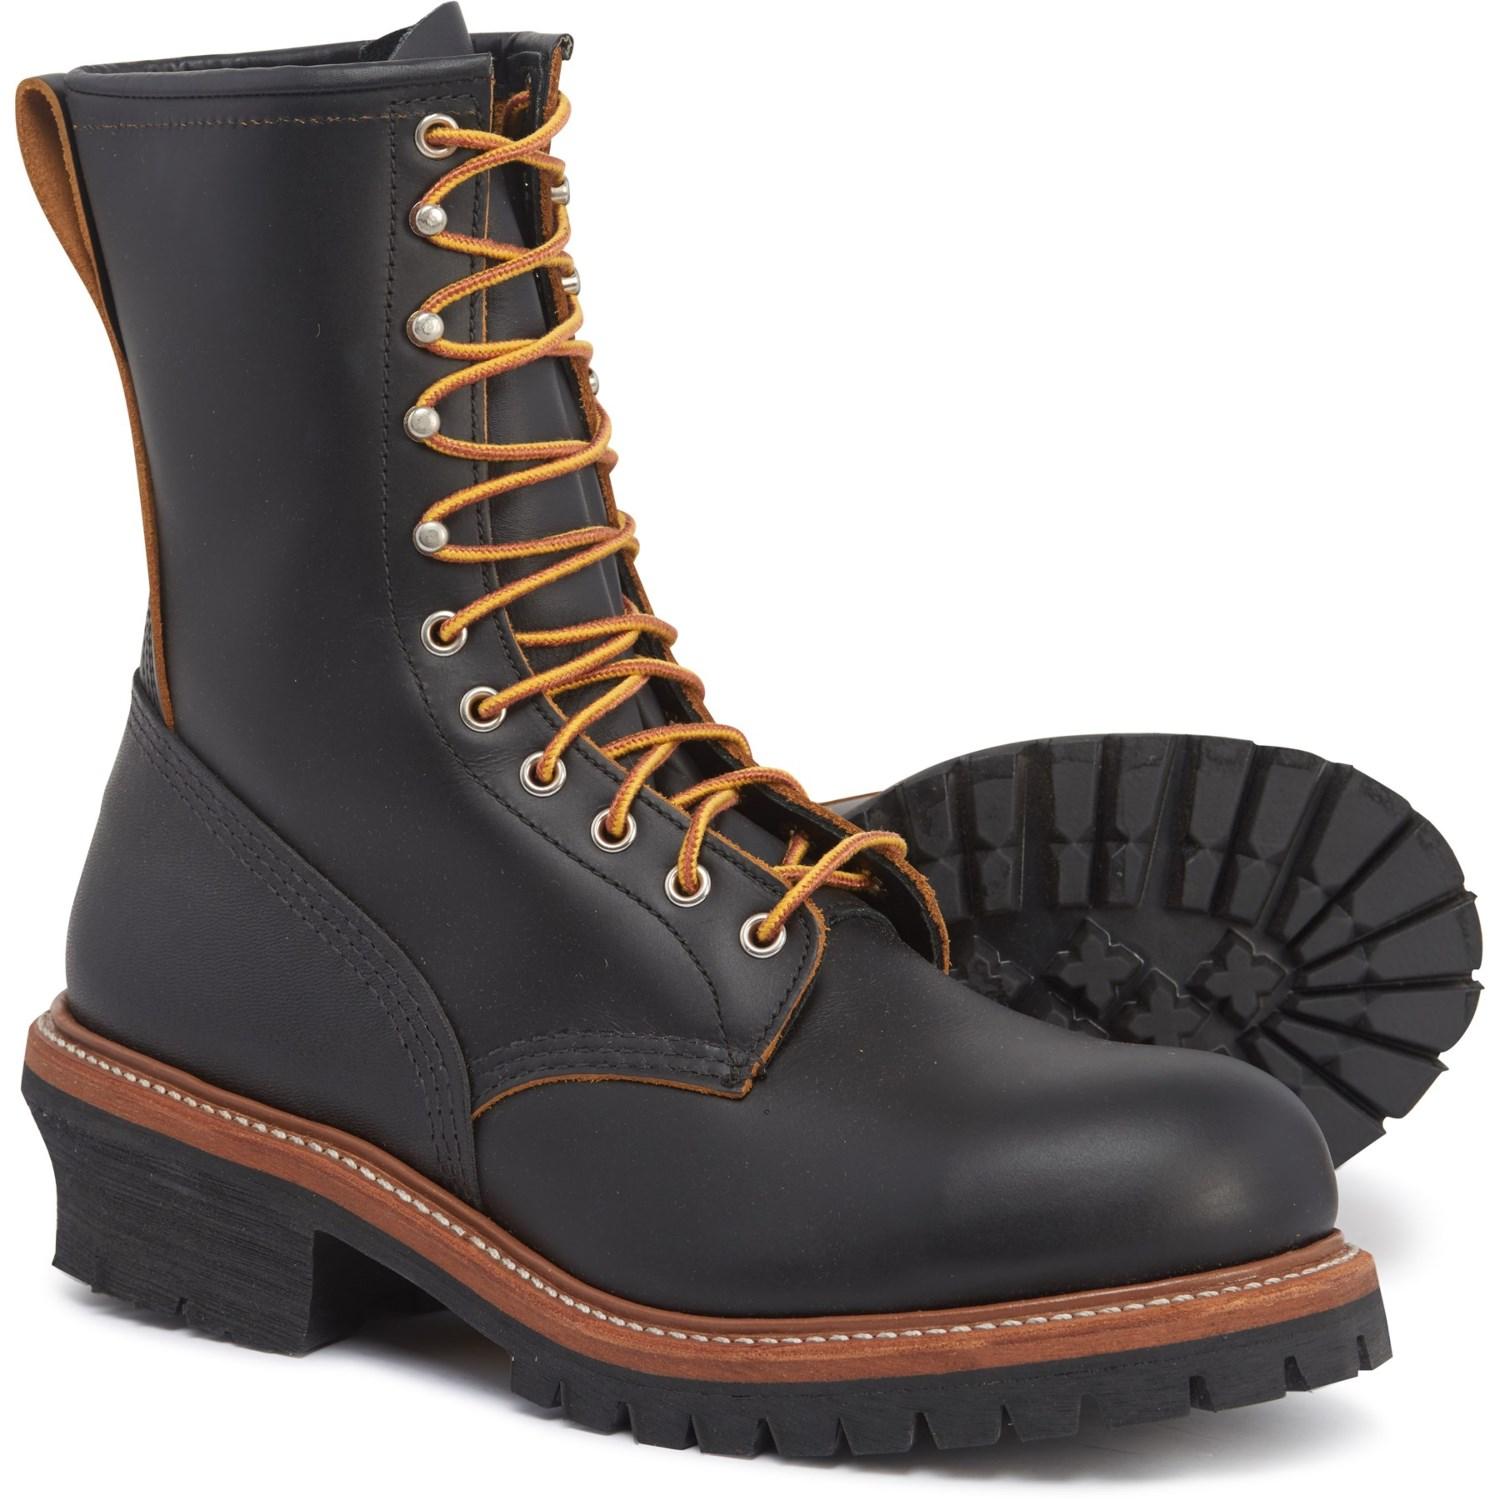 Red Wing Gore Tex Logger Boots | peacecommission.kdsg.gov.ng